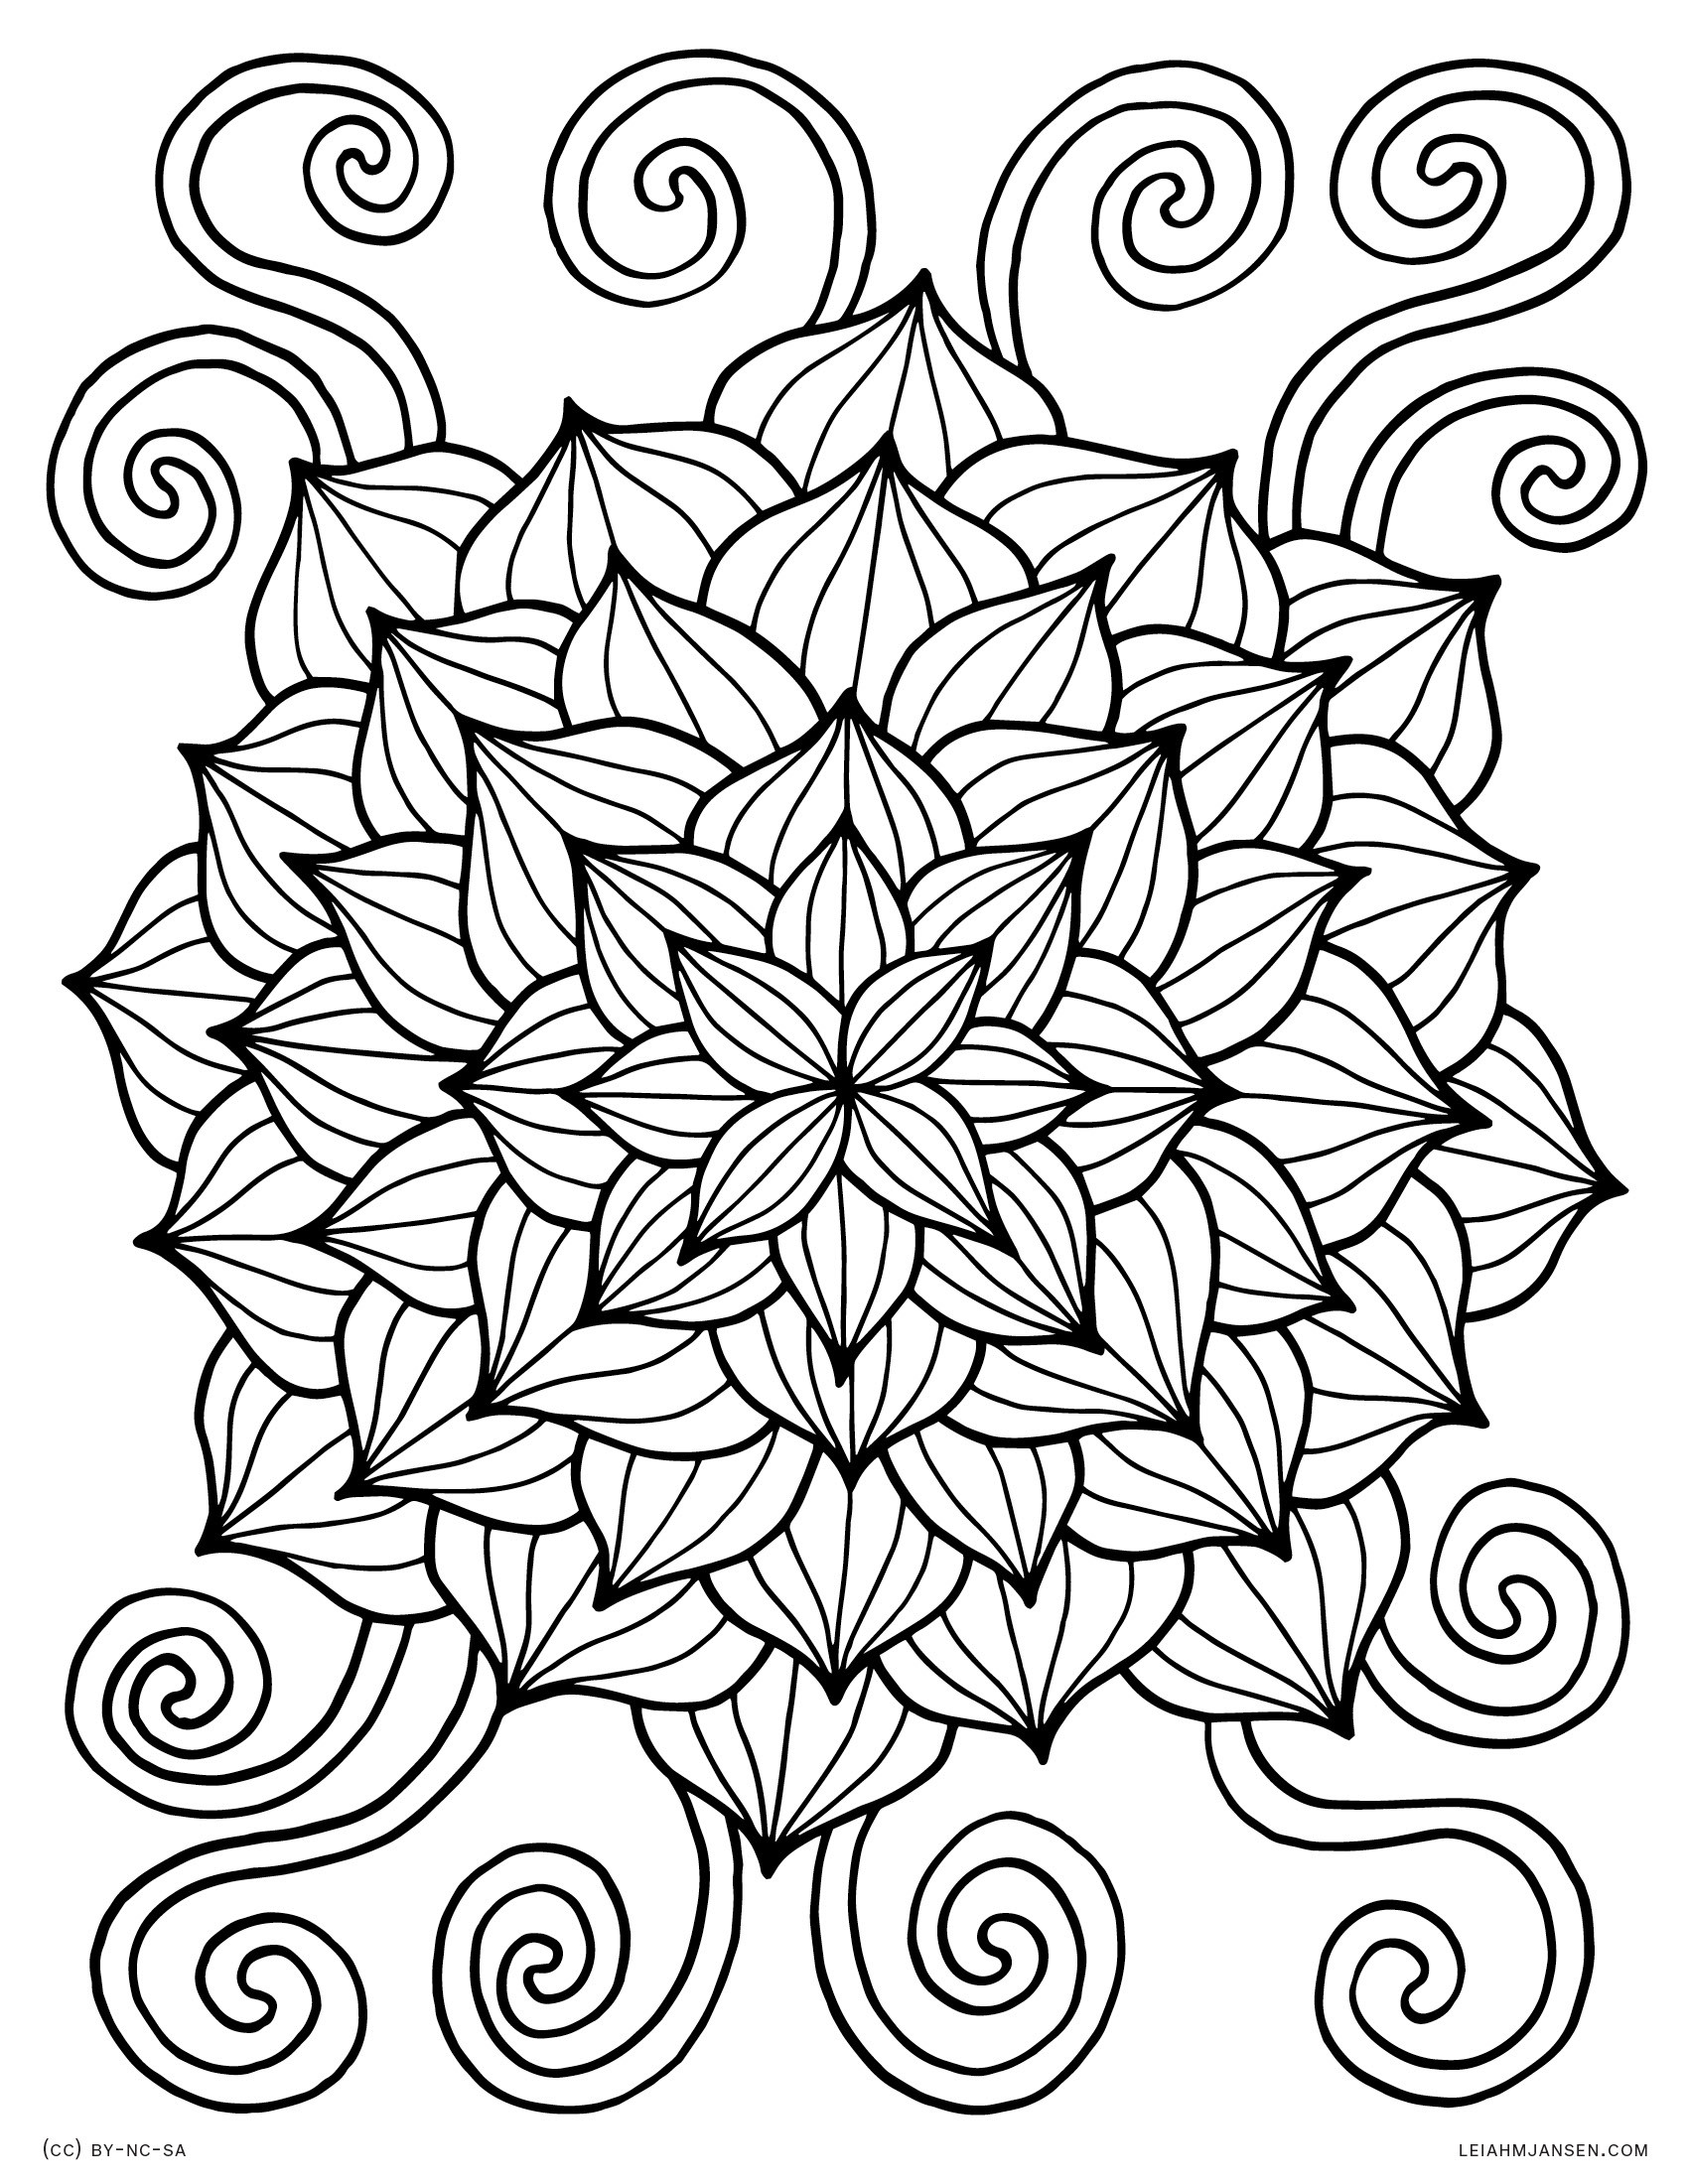 Coloring Pages For Adults Abstract Flowers
 Coloring Pages